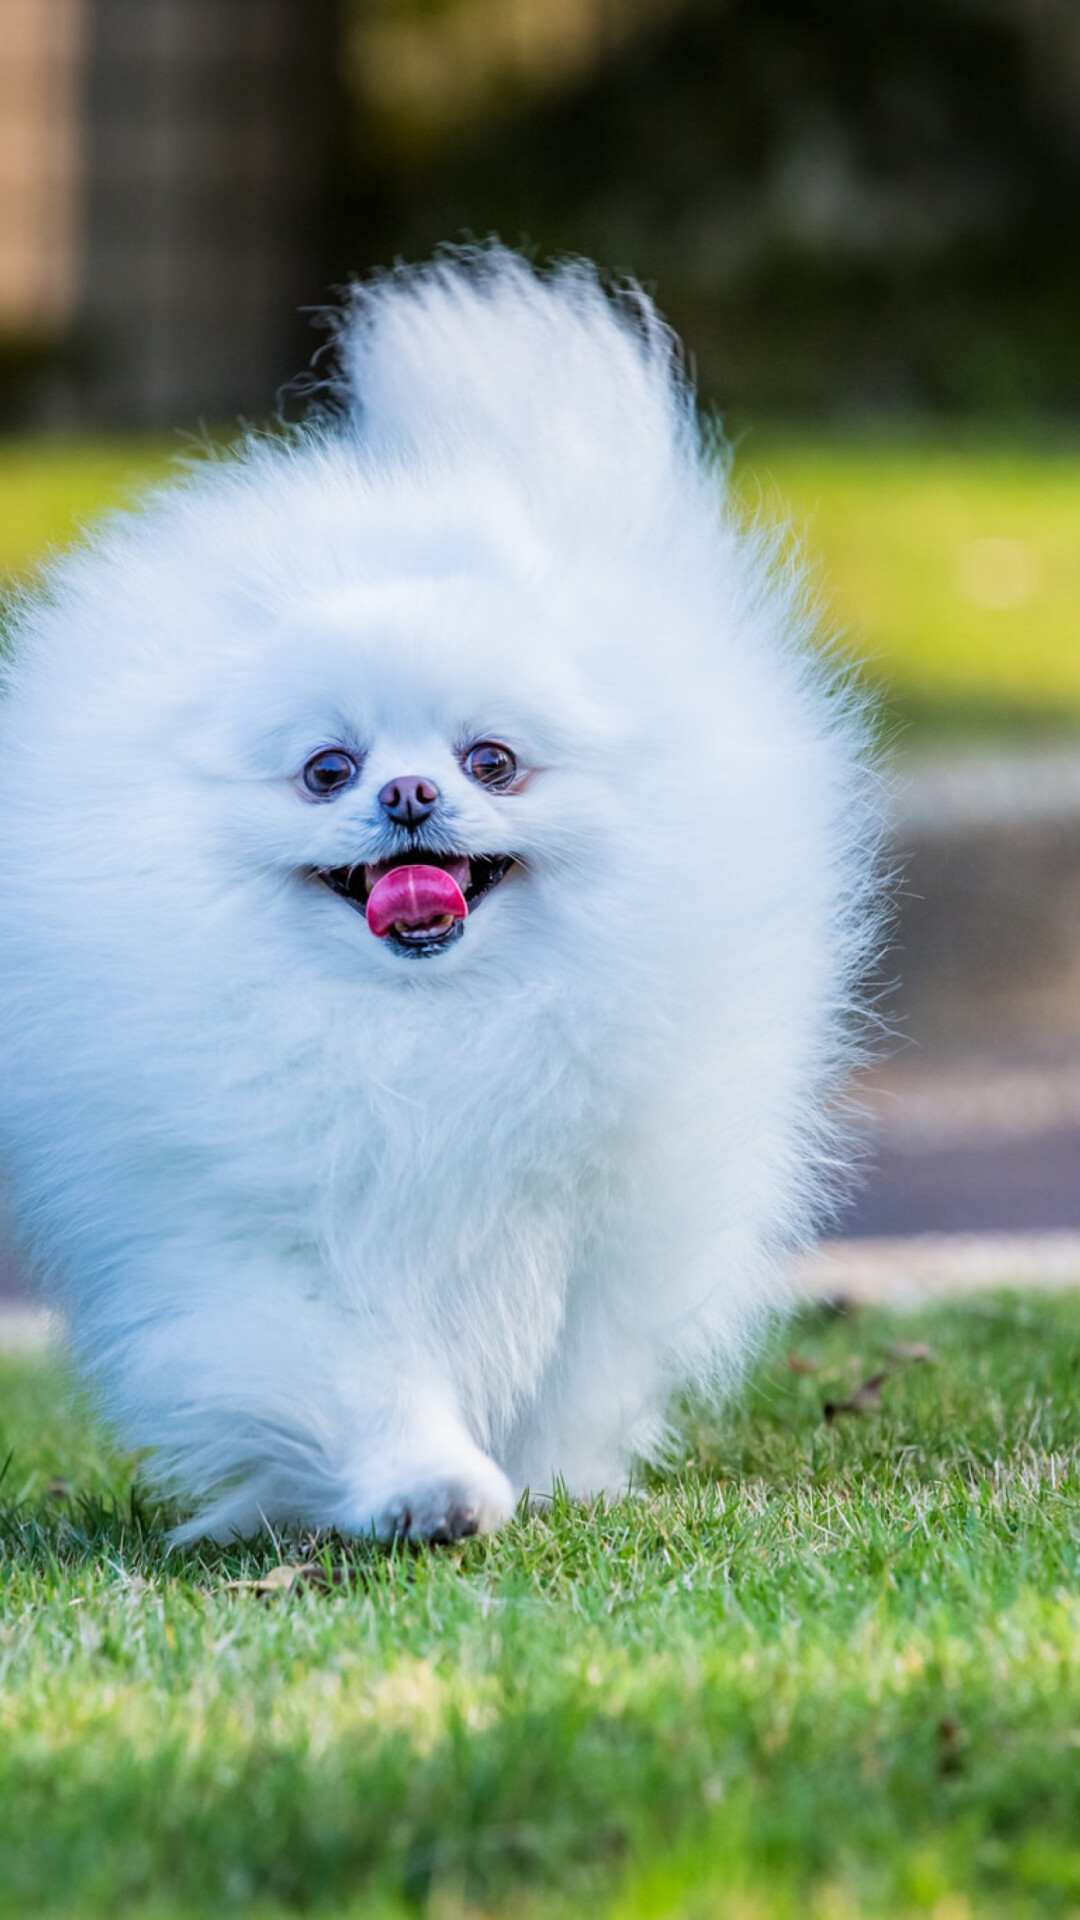 Pomeranian: The breed is fun-loving, intelligent, and confident to the point of brashness. 1080x1920 Full HD Background.